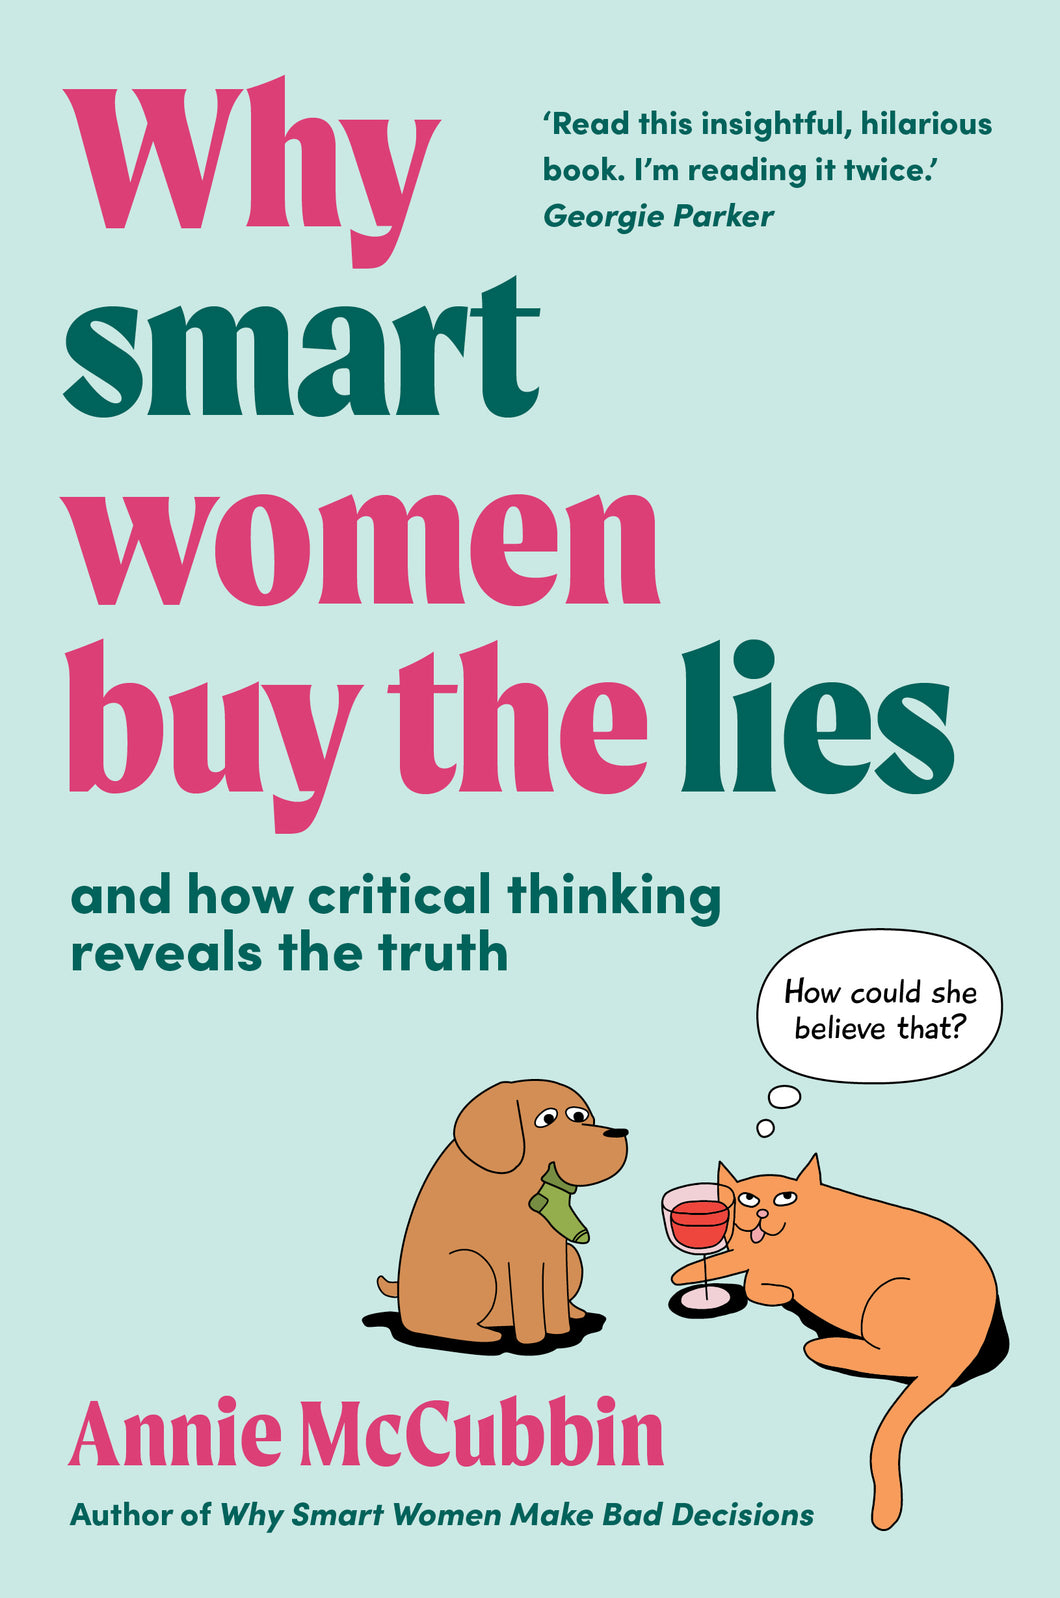 Why Smart Women Buy the Lies: and how critical thinking reveals the truth<br><i><small> by Annie McCubbin </i> </small>